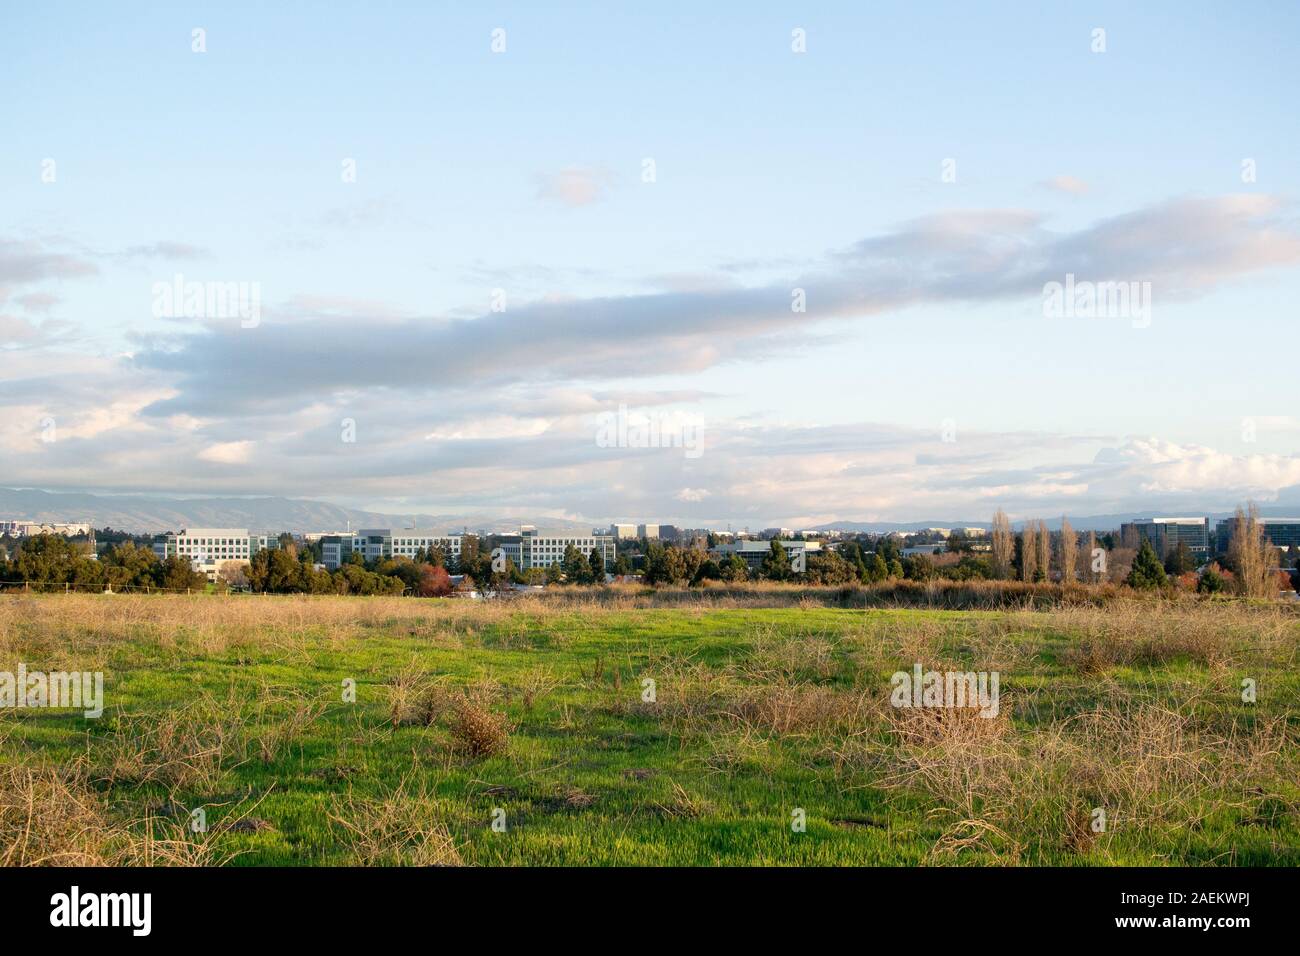 View of Sunnyvale, Silicon Valley from the San Francisco Bay Trail showing office blocks with mountains on the horizon Stock Photo